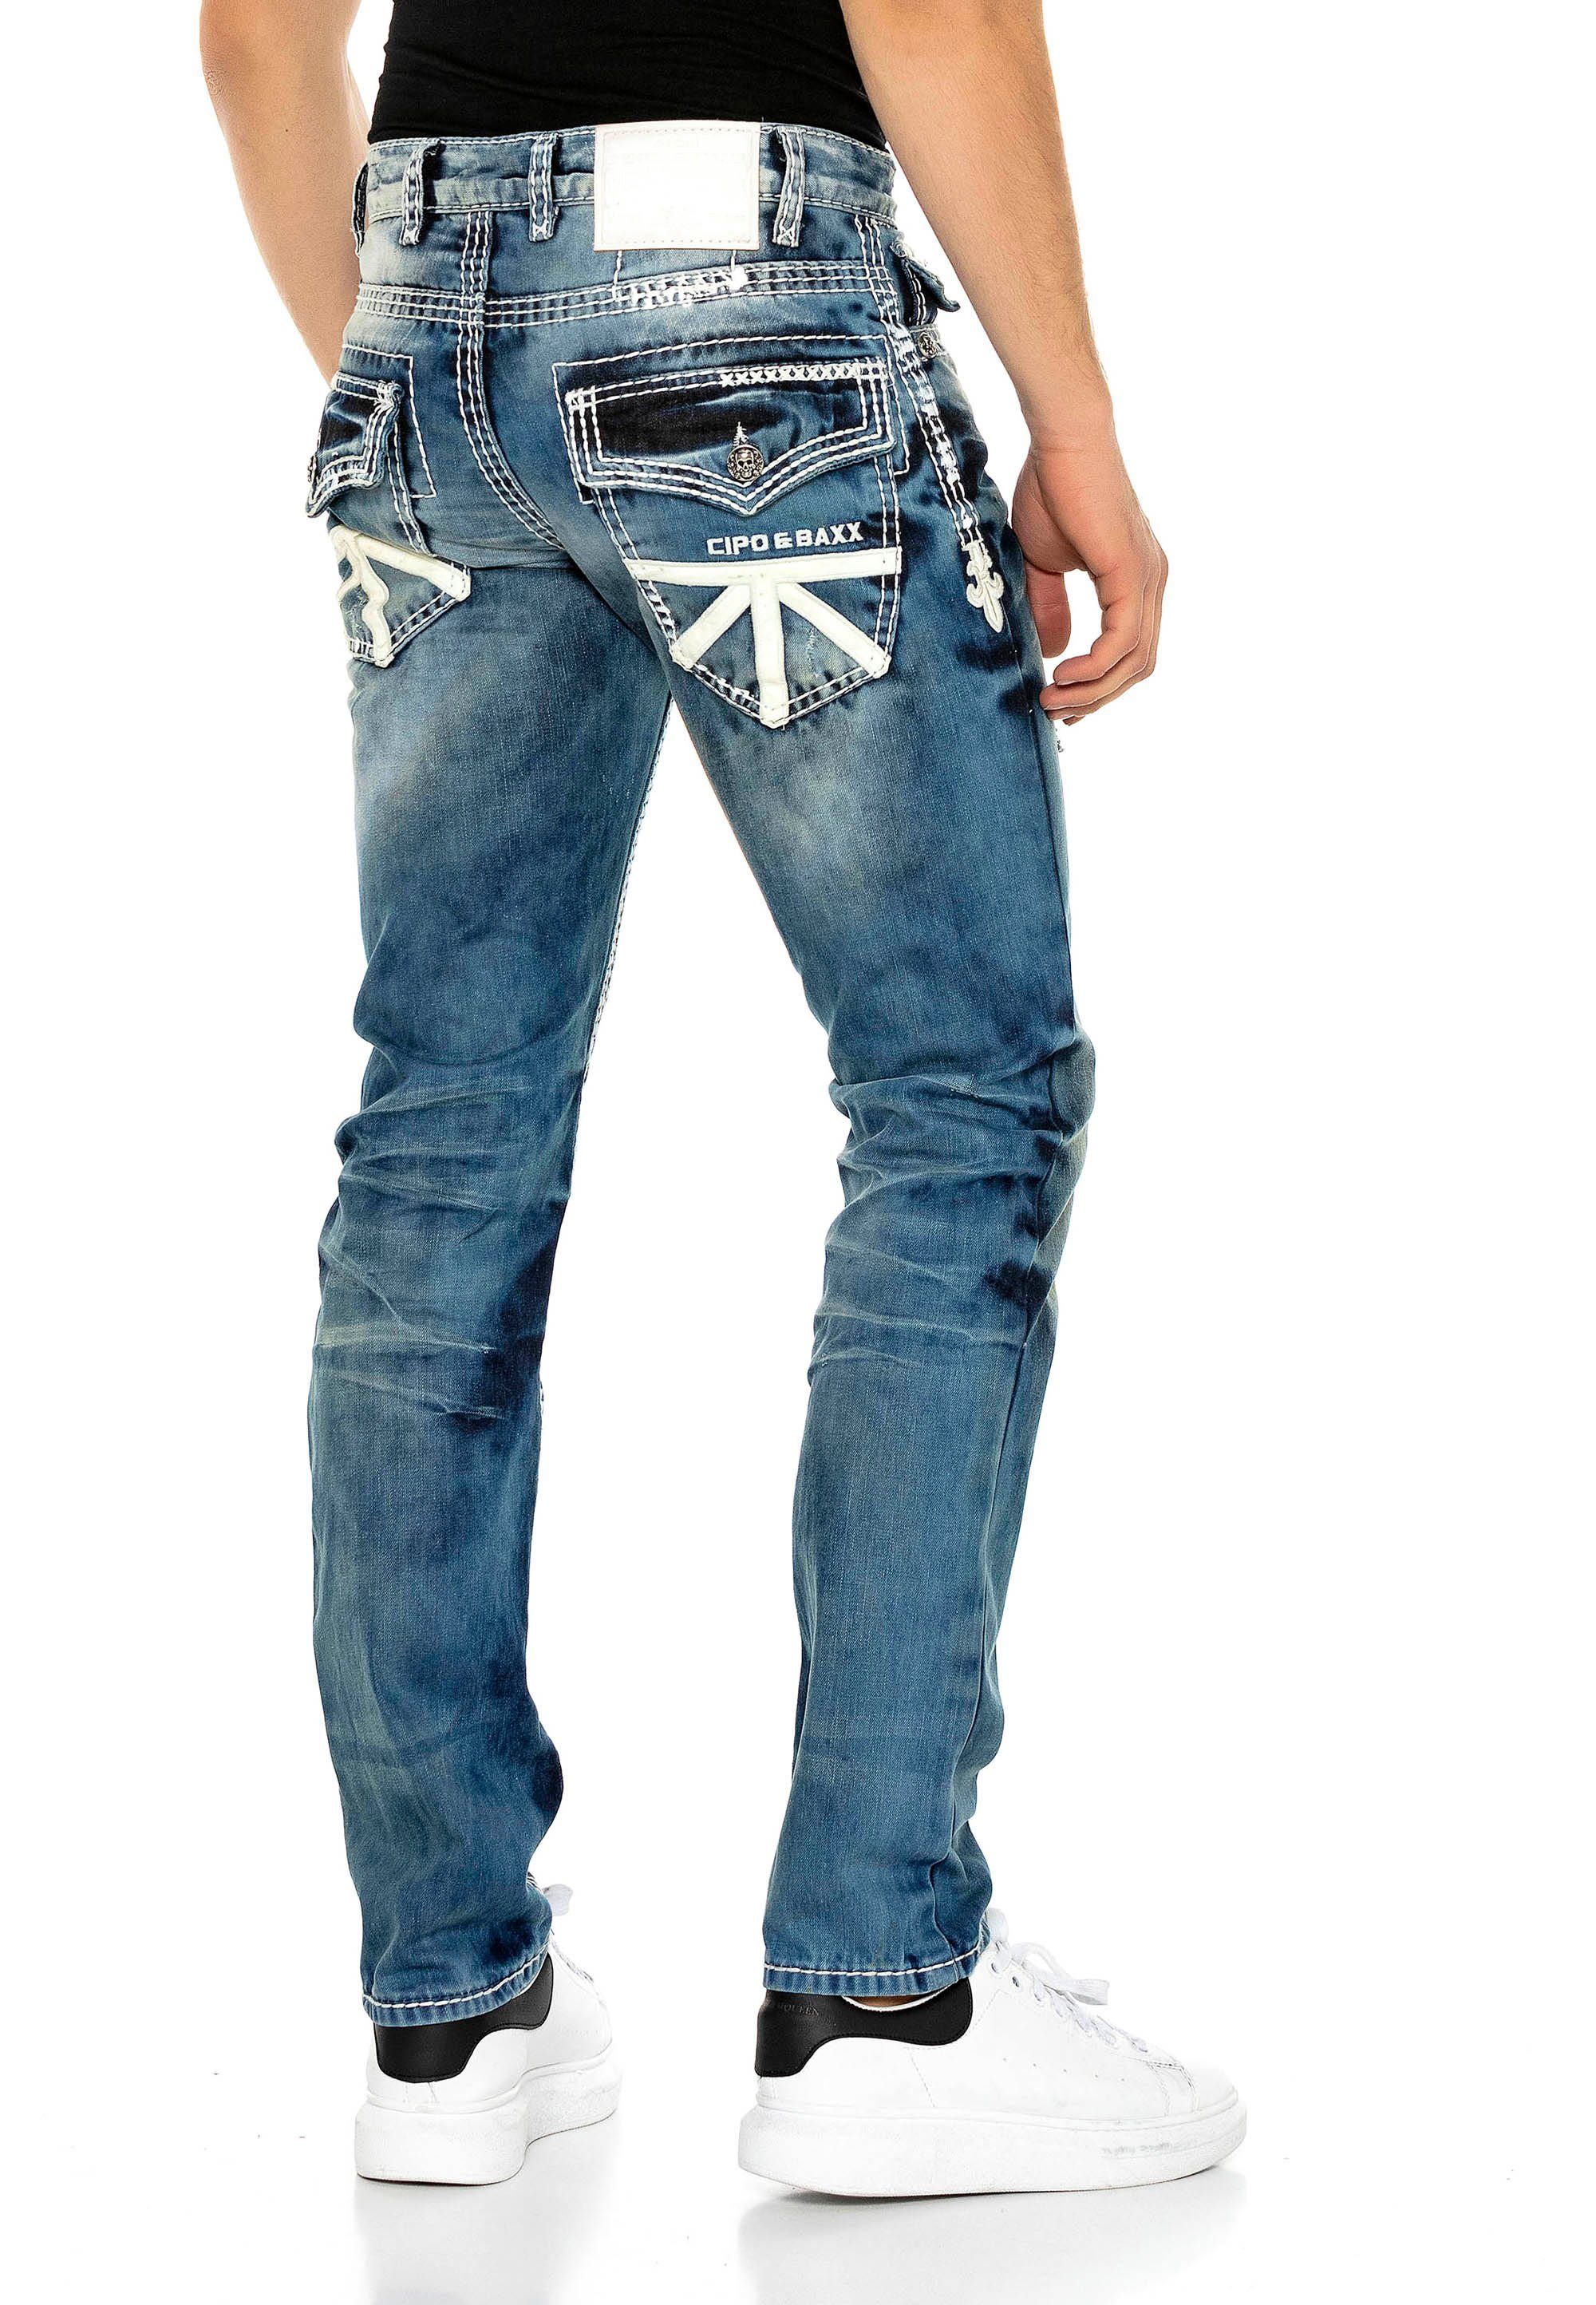 Cipo & Baxx Bequeme Jeans coolen im Straight Used-Look Fit